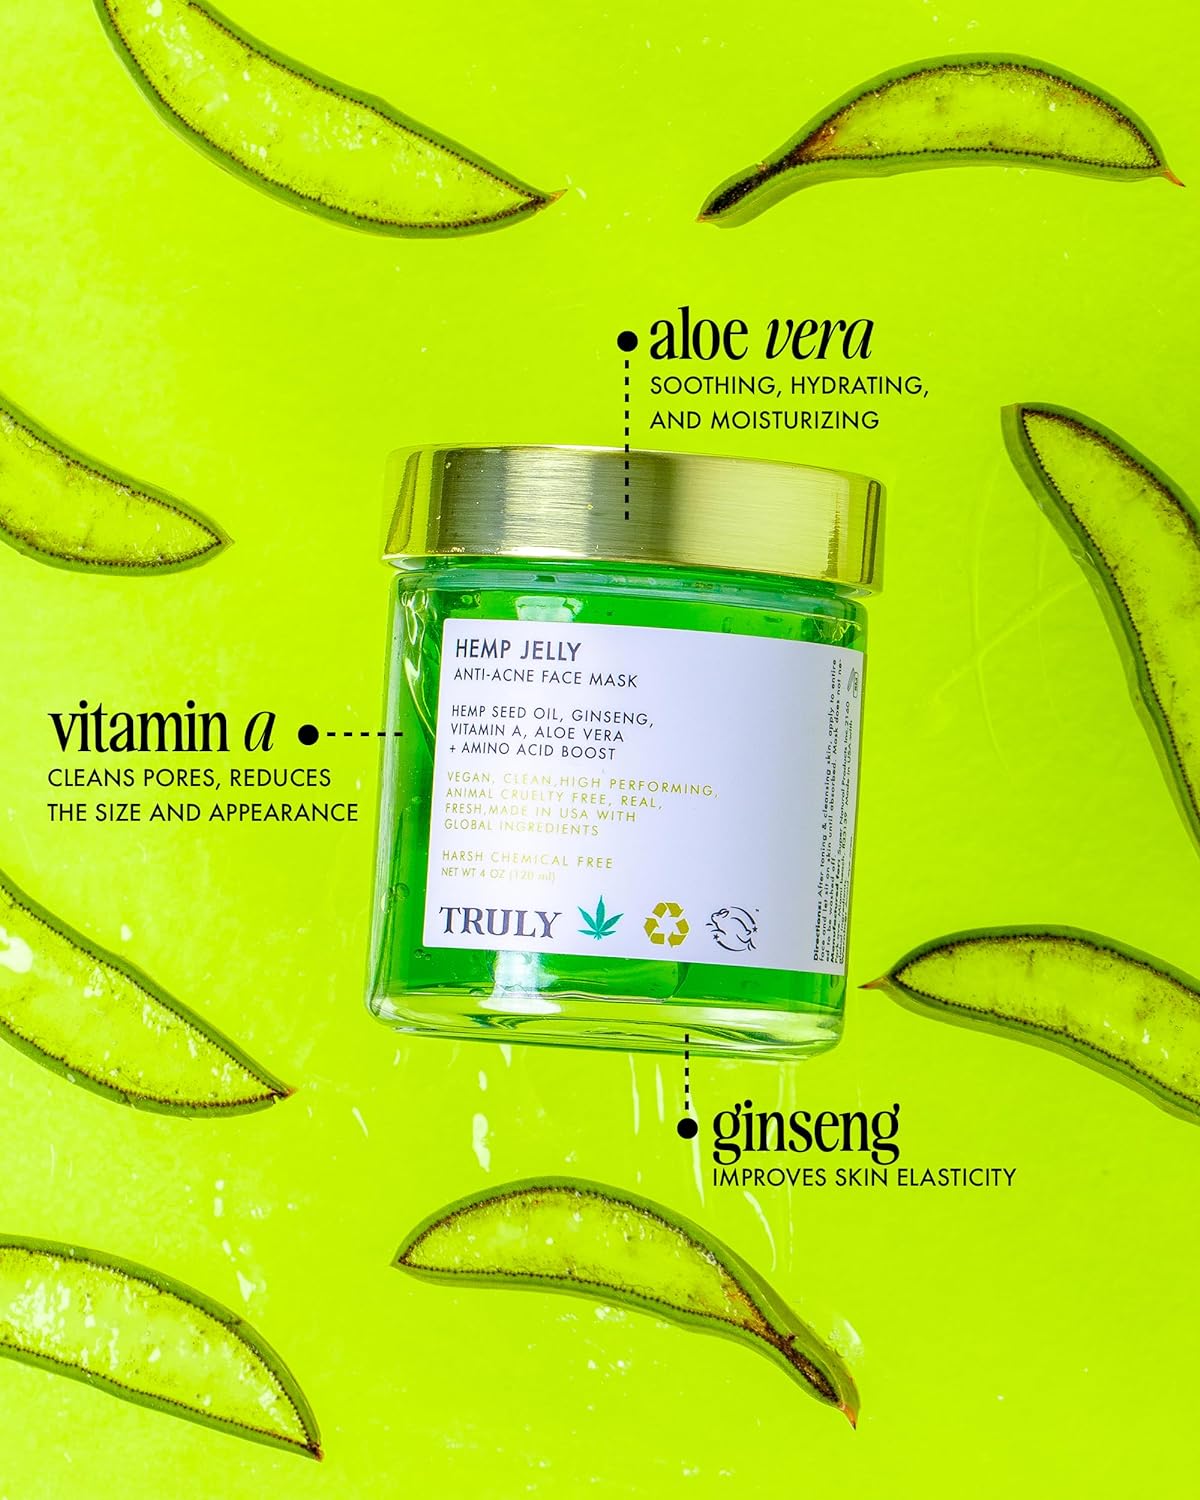 Truly Beauty Jelly Anti-Acne Face Mask With Vitamin A, And Aloe Vera - Face Masks Skincare Acne For Minimizing Pores, Clarifying Blemishes And Improve Skin - 4 Fl. Oz